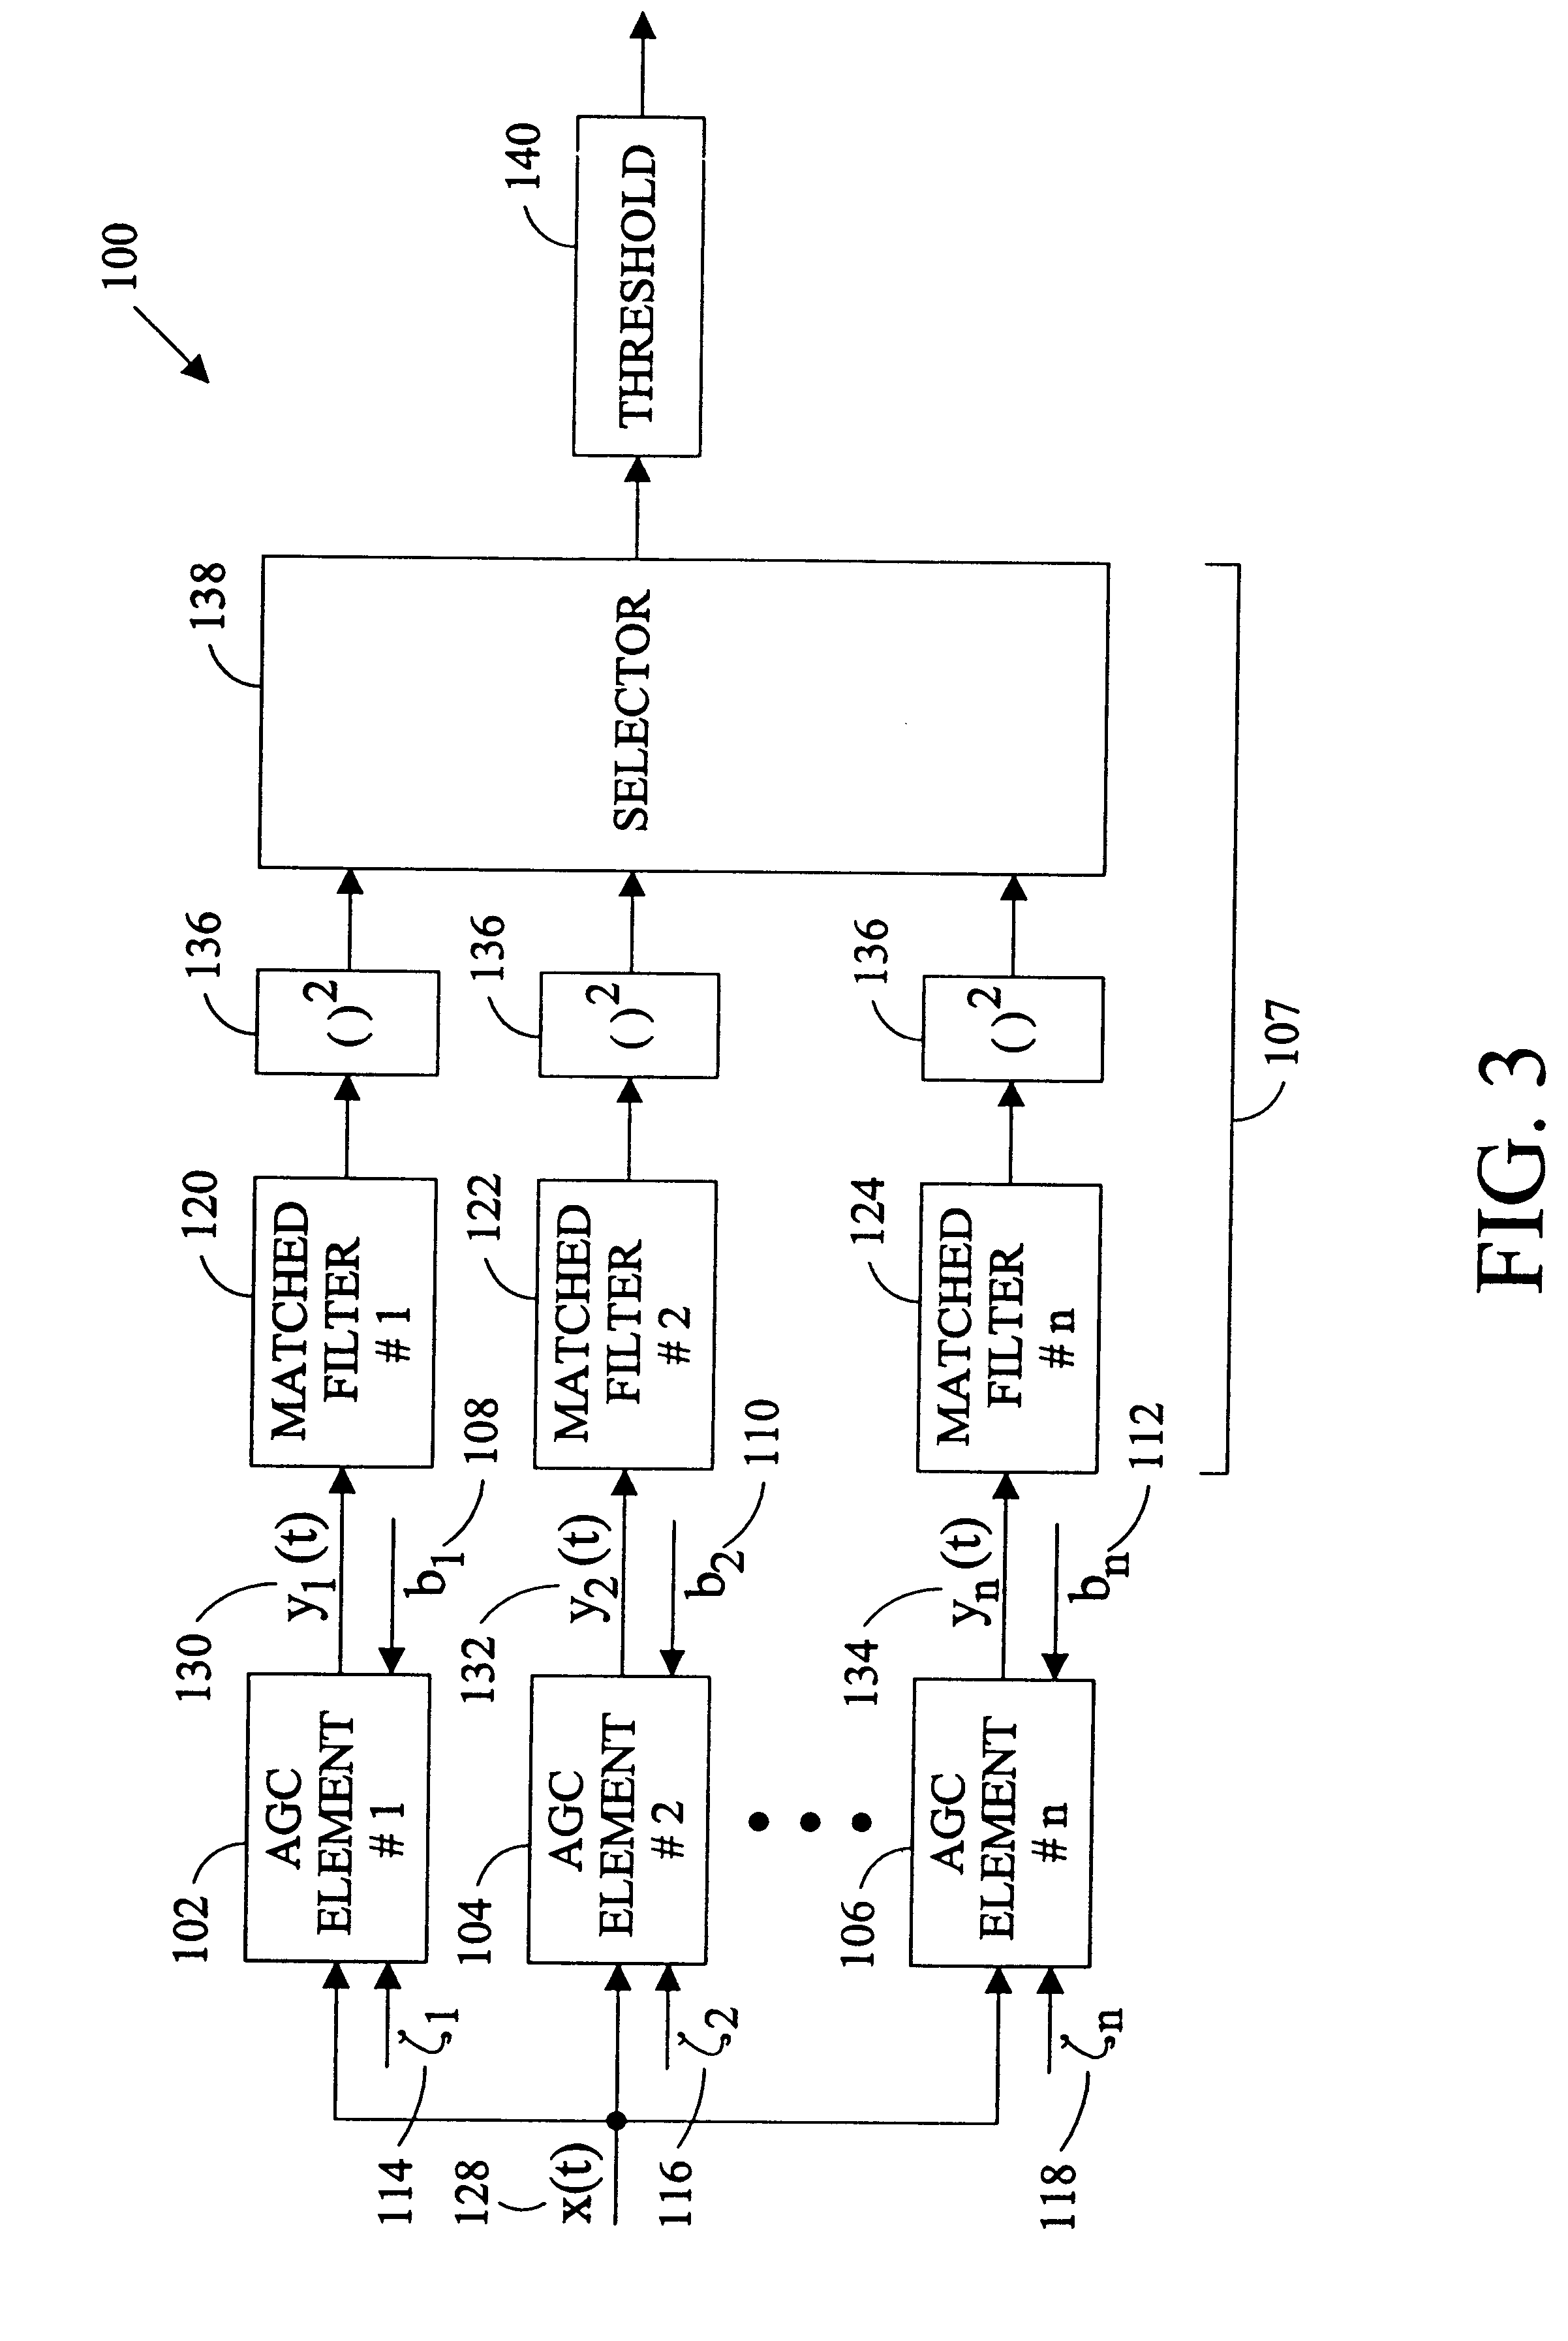 Rapid settling automatic gain control with minimal signal distortion